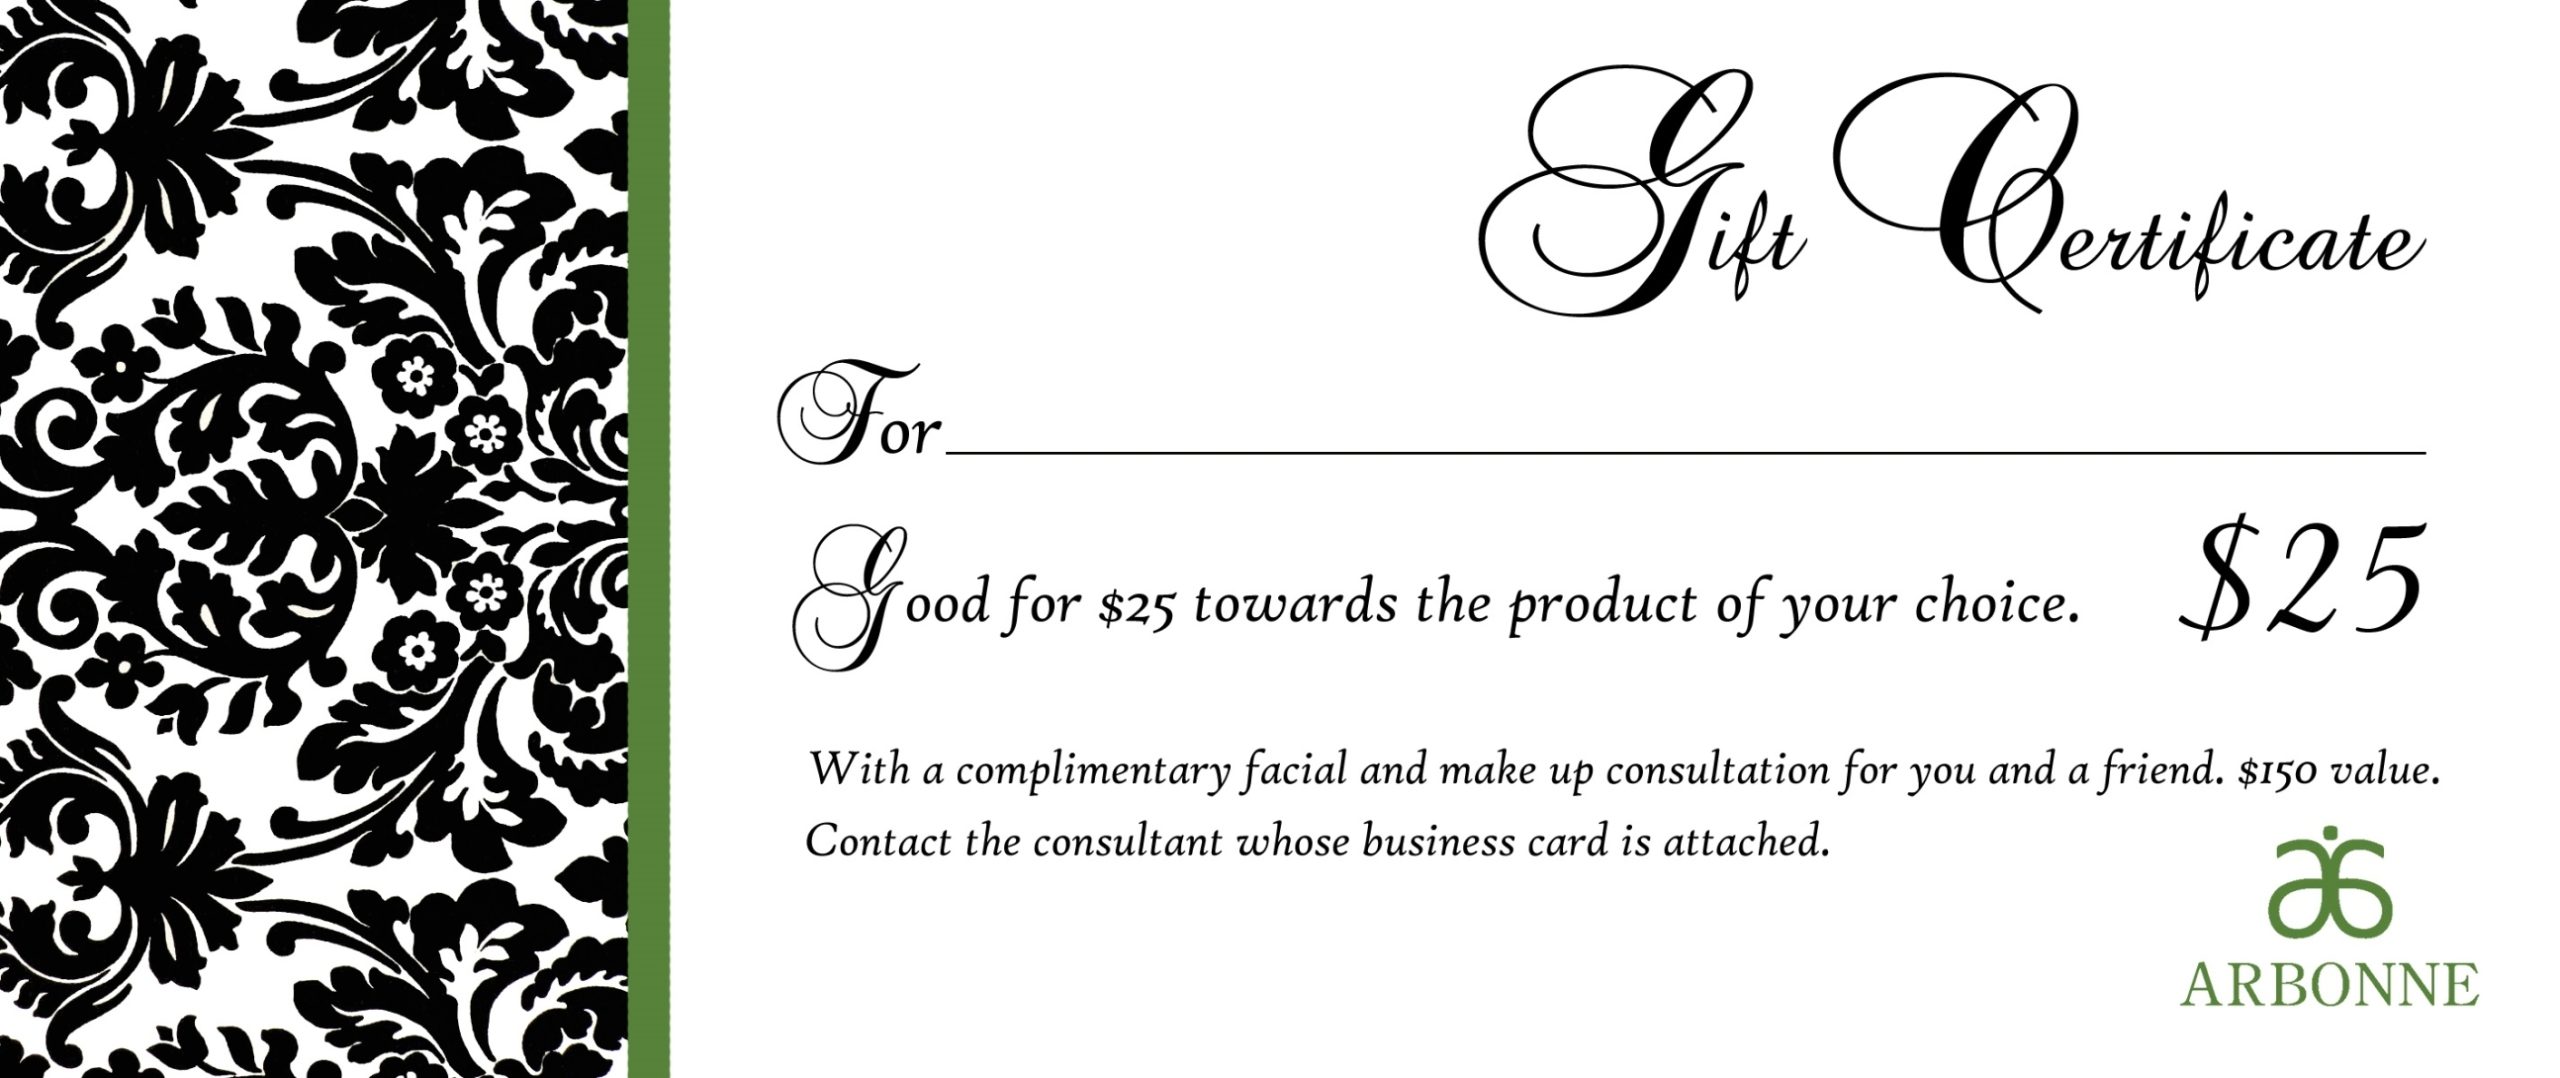 Gift Certificate Templates To Print | Activity Shelter Throughout Donation Card Template Free